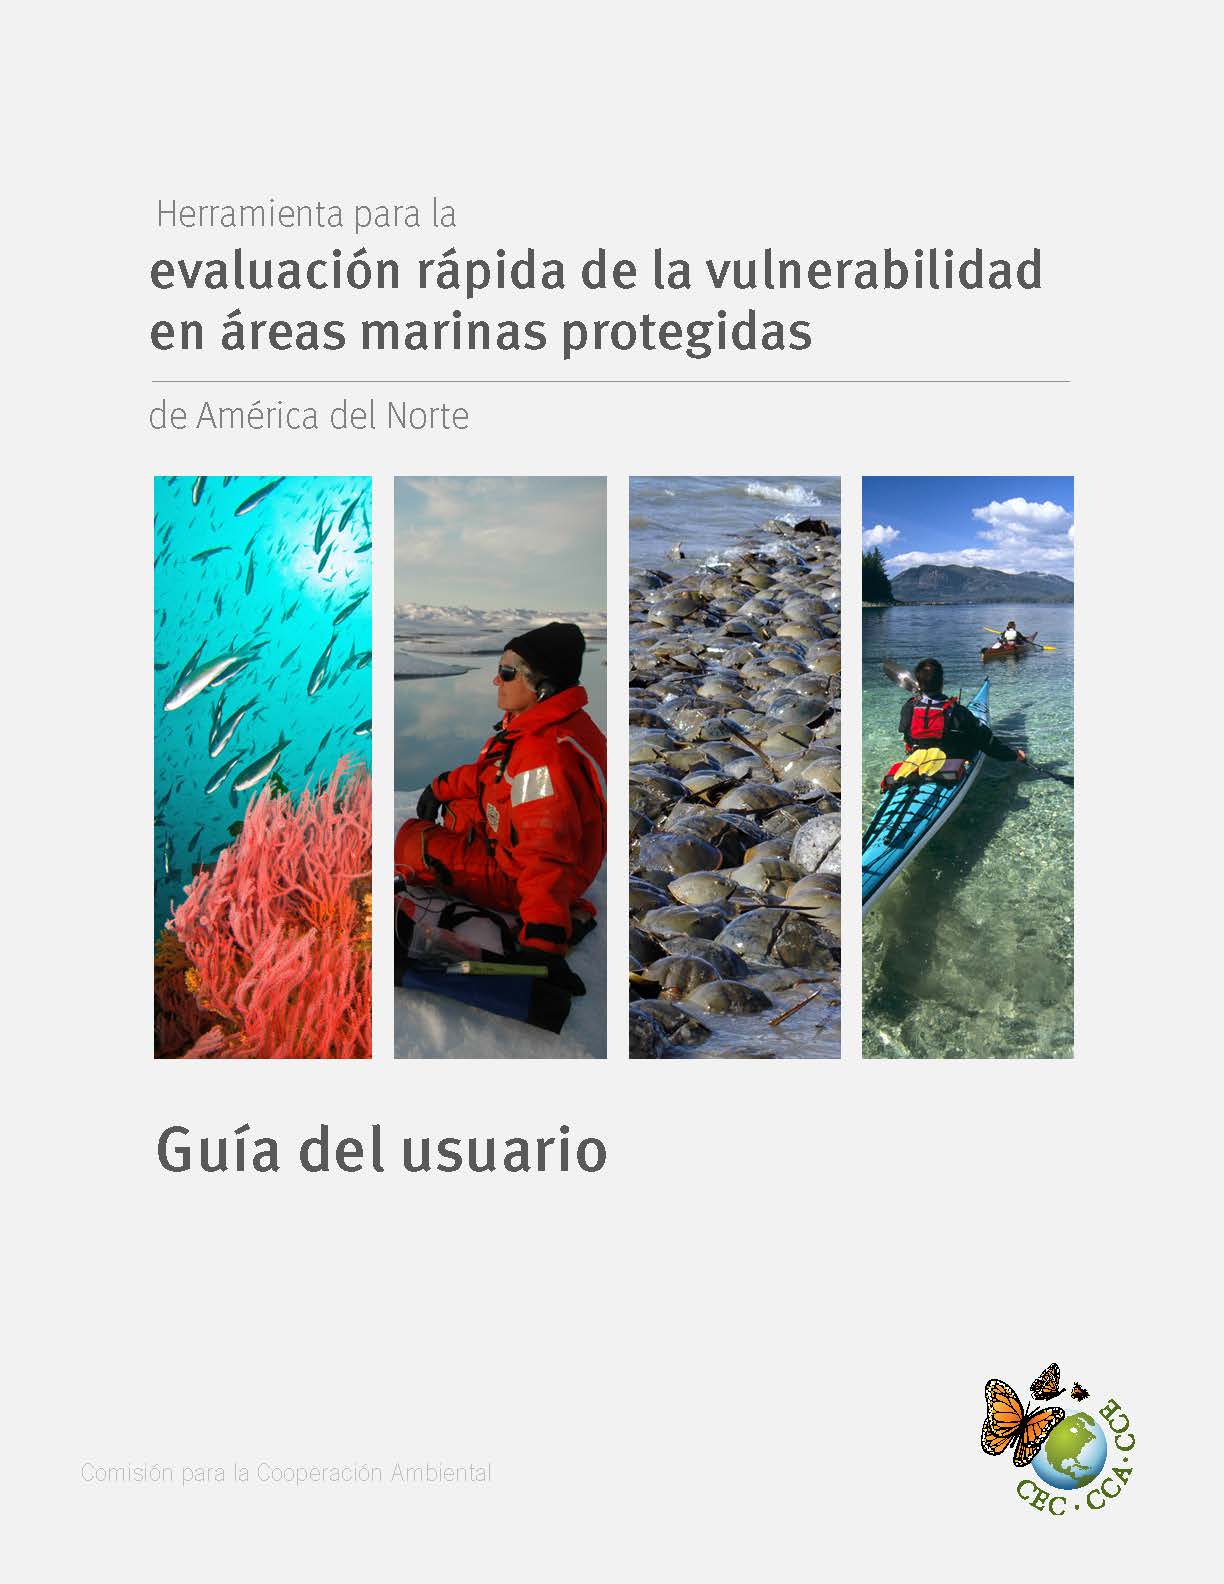 /cms/uploads/image/file/563318/11733-north-american-marine-protected-area-rapid-vulnerability-assessment-tool-es.jpg